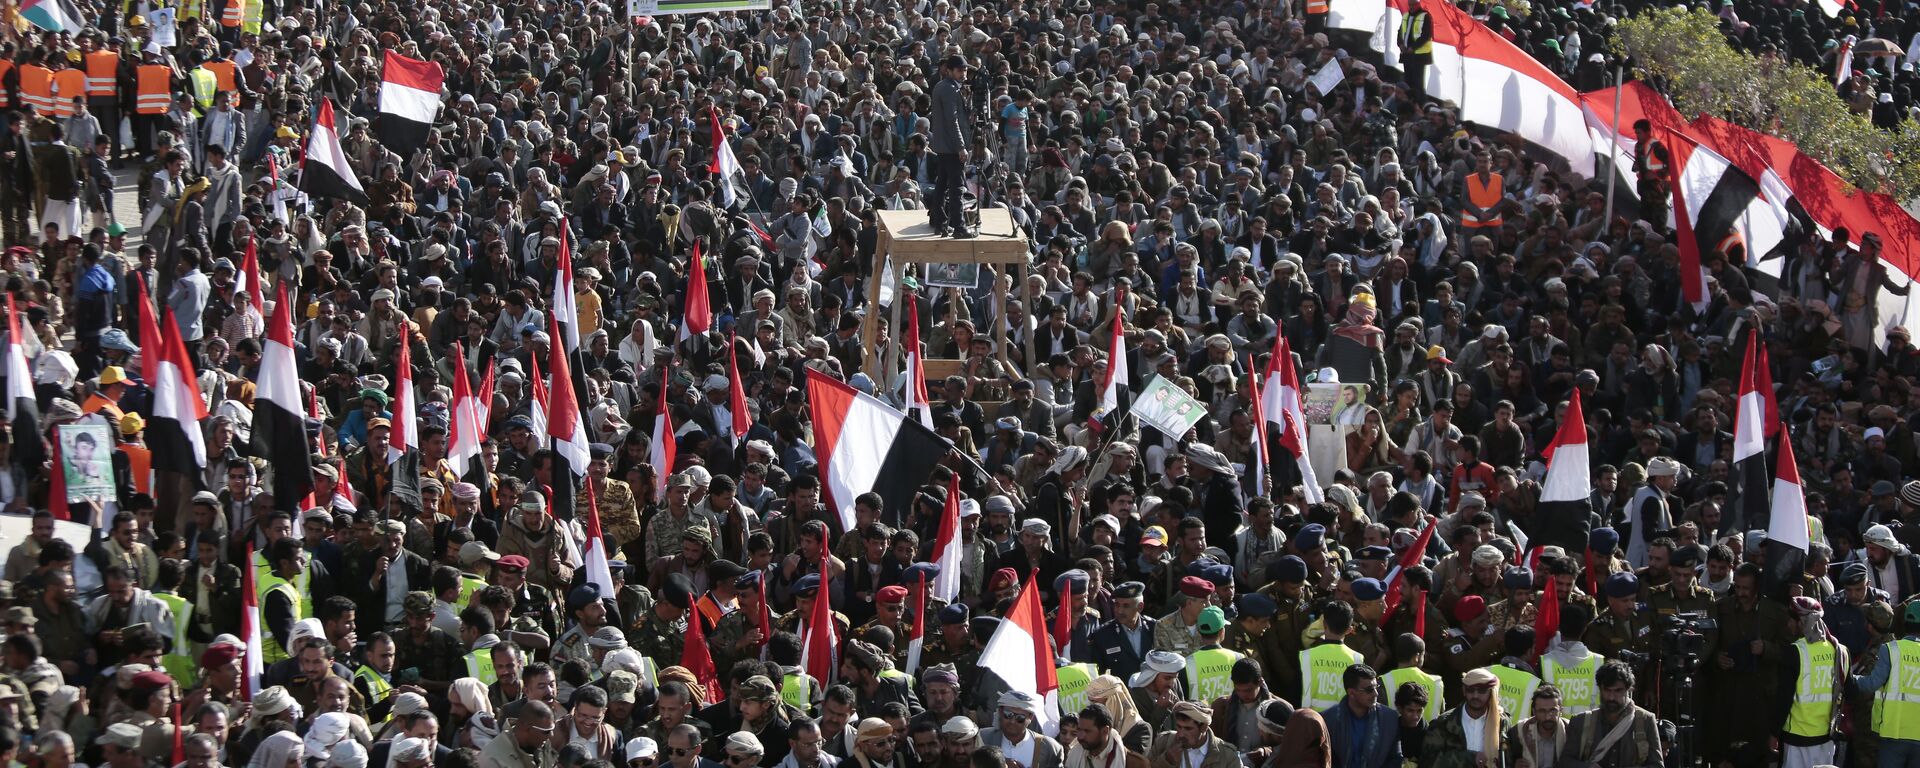 Supporters of Shiite Houthi rebels attend a rally in Sanaa, Yemen, Tuesday, Dec. 5, 2017. The killing of Yemen's ex-President Ali Abdullah Saleh by the country's Shiite rebels on Monday, as their alliance crumbled, has thrown the nearly three-year civil war into unpredictable new chaos. - Sputnik International, 1920, 01.04.2022